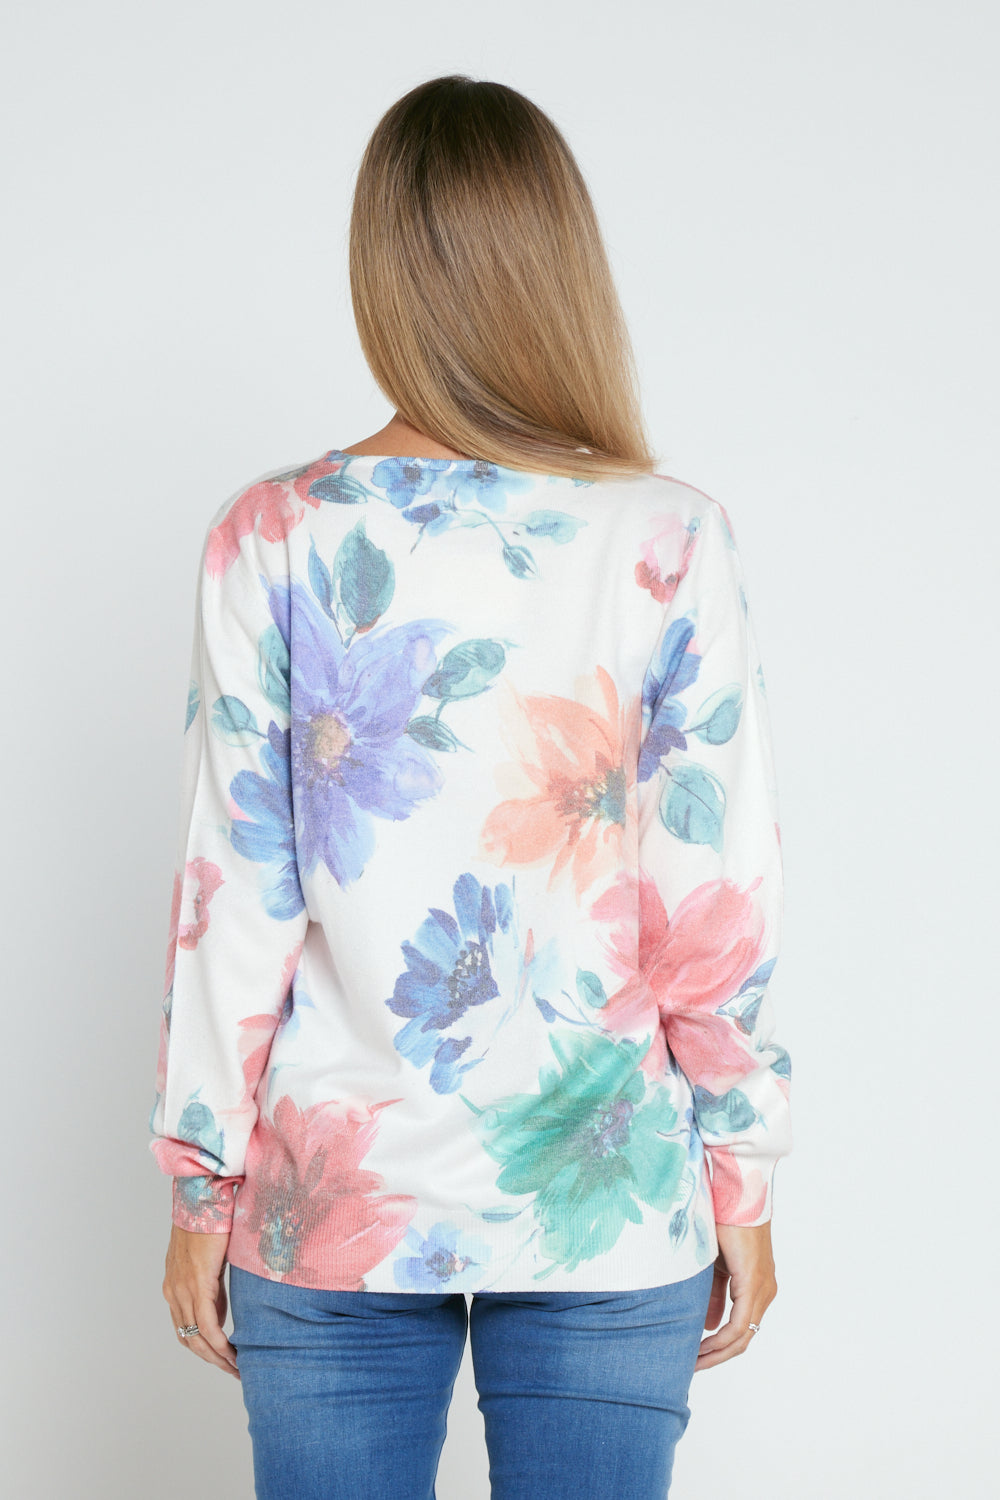 Ira Knit Top - Floral Watercolour